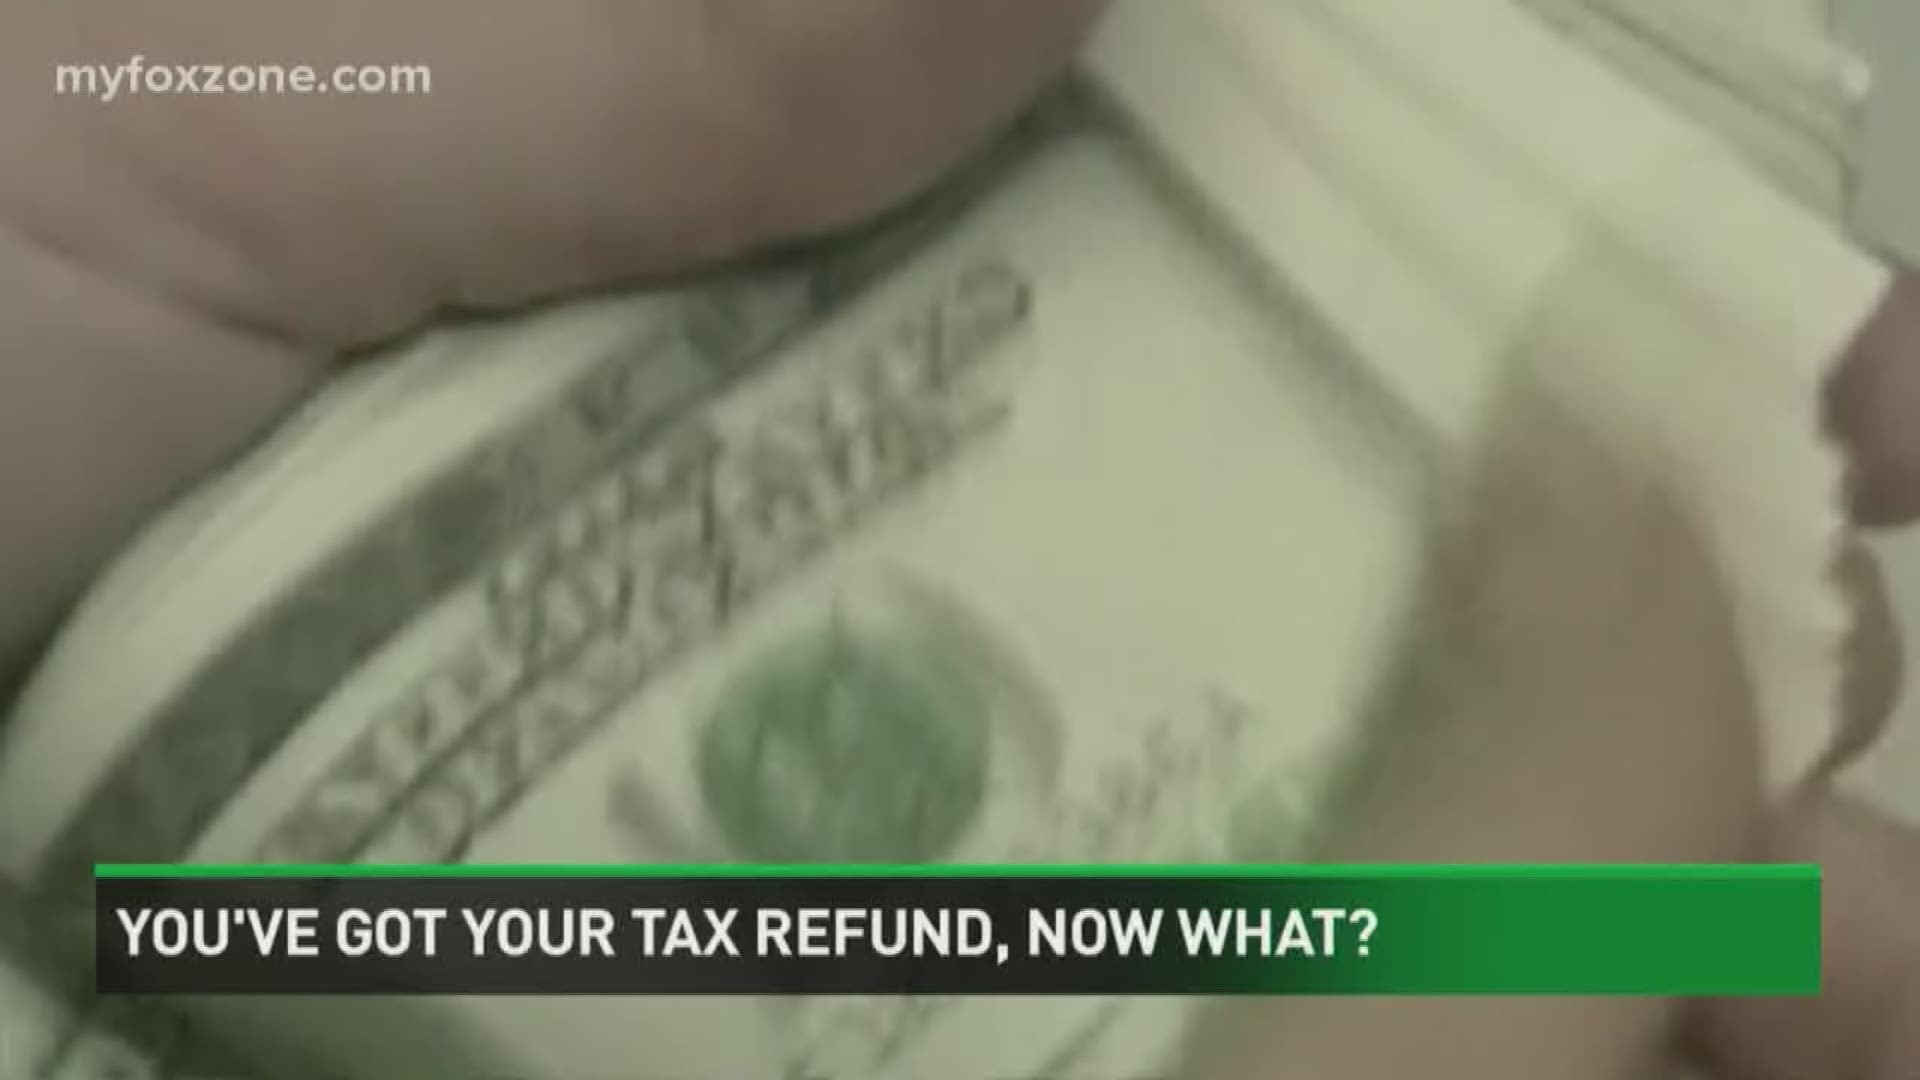 Our Malik Mingo shares tips on how to spend your income tax refund.